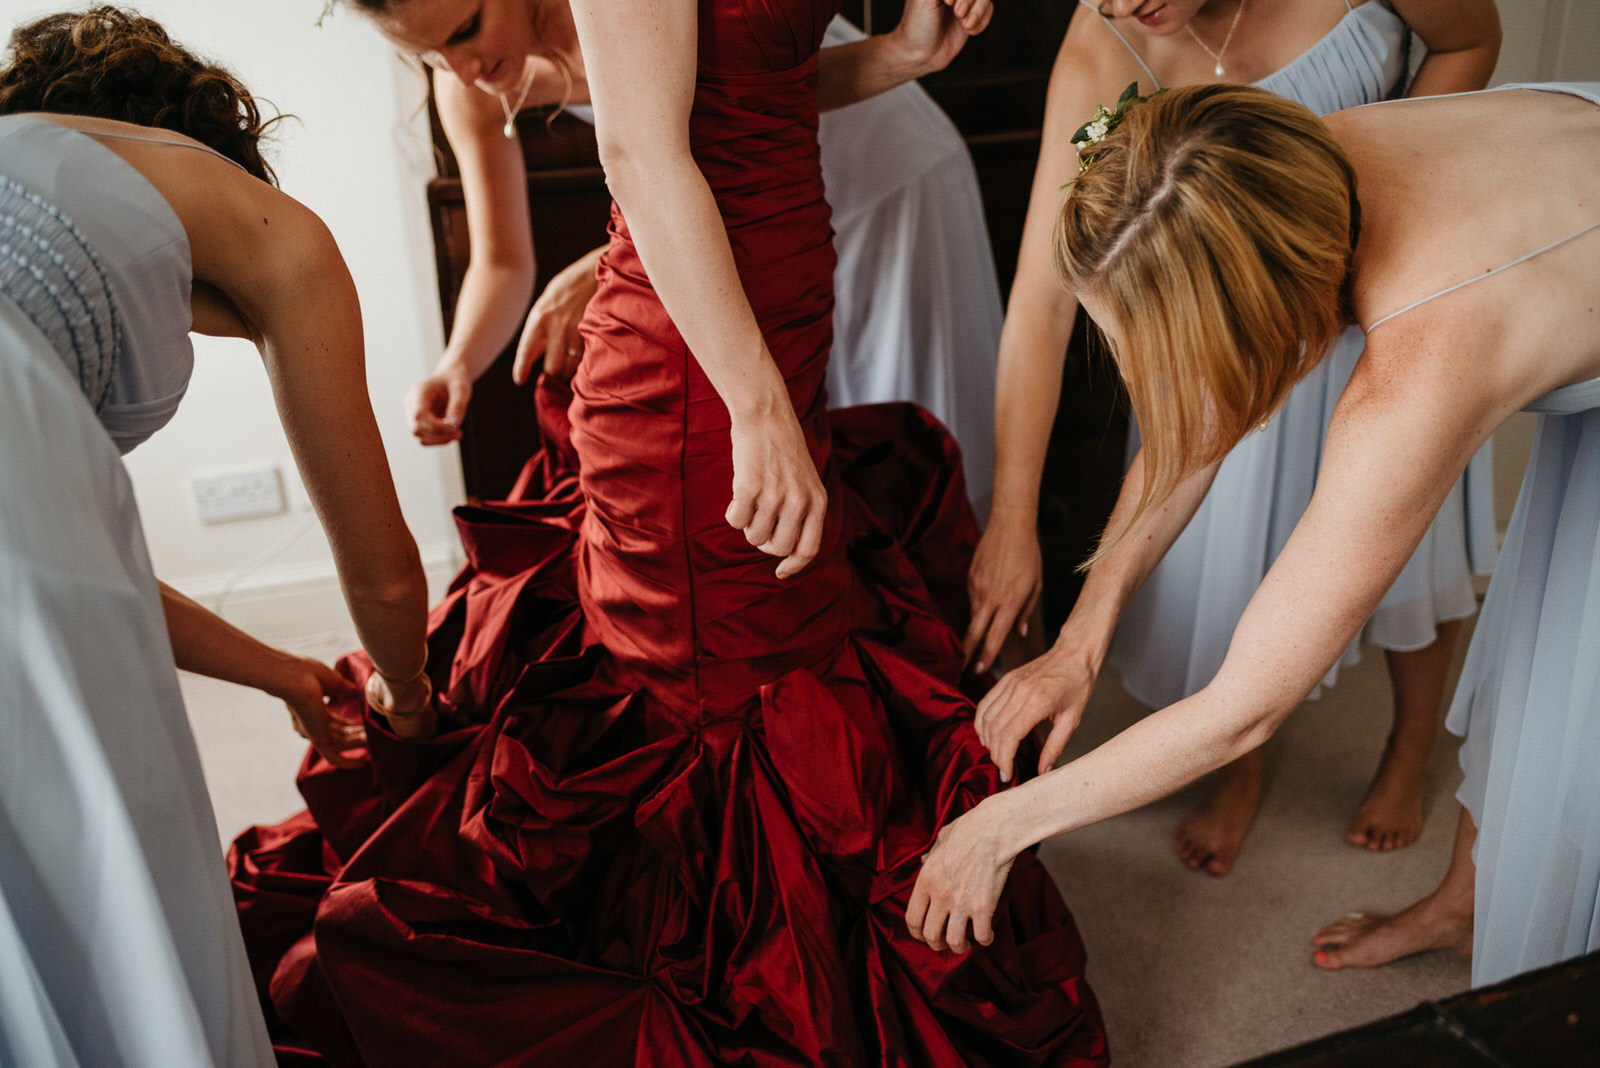 bridesmaids fuss with red taffeta wedding dress during morning getting ready